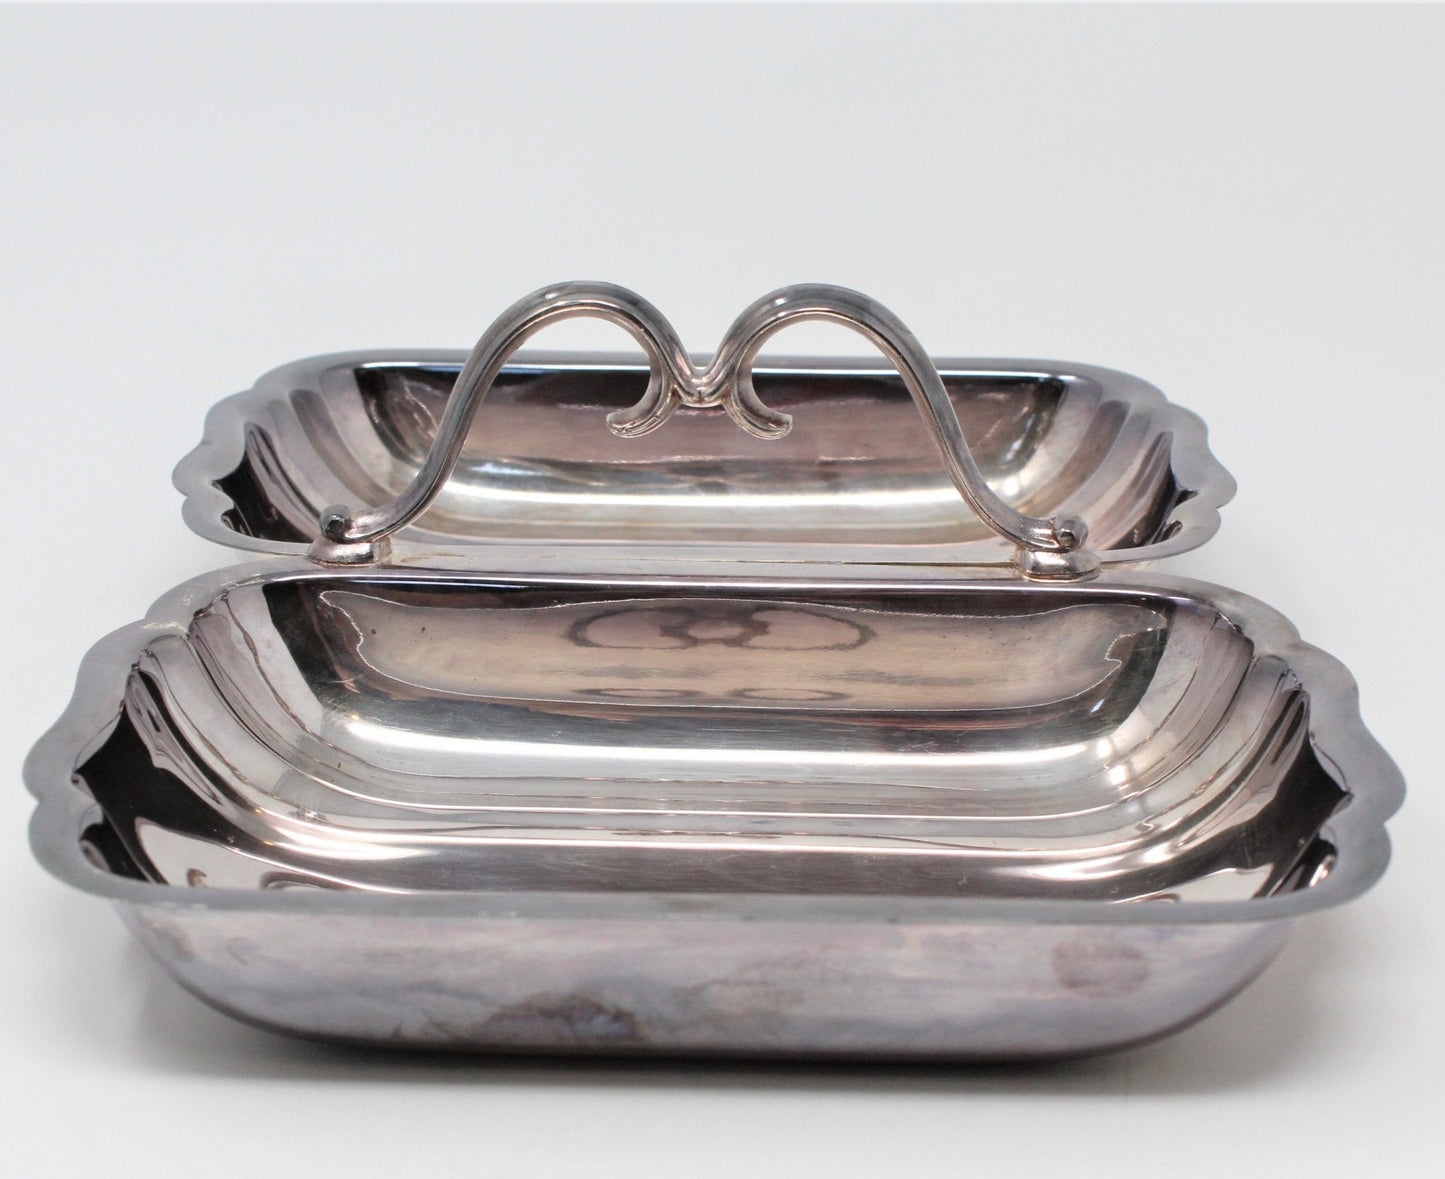 Divided Relish Dish, Poole Silver, Bristol Plate 104, Vintage